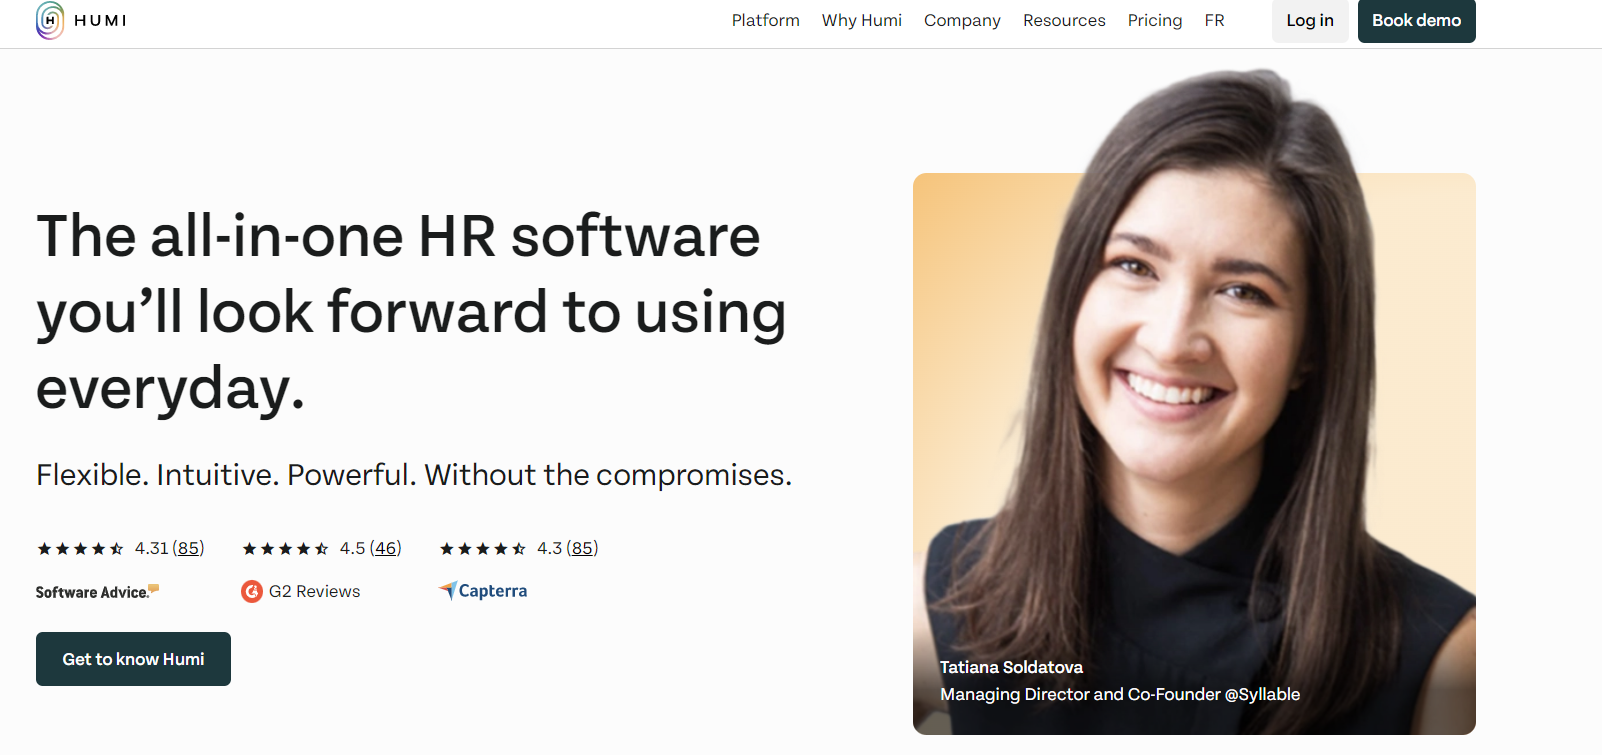 Humi is a Canadian-based human resources software company that provides small and medium-sized businesses with HR, payroll, and benefits solutions. 